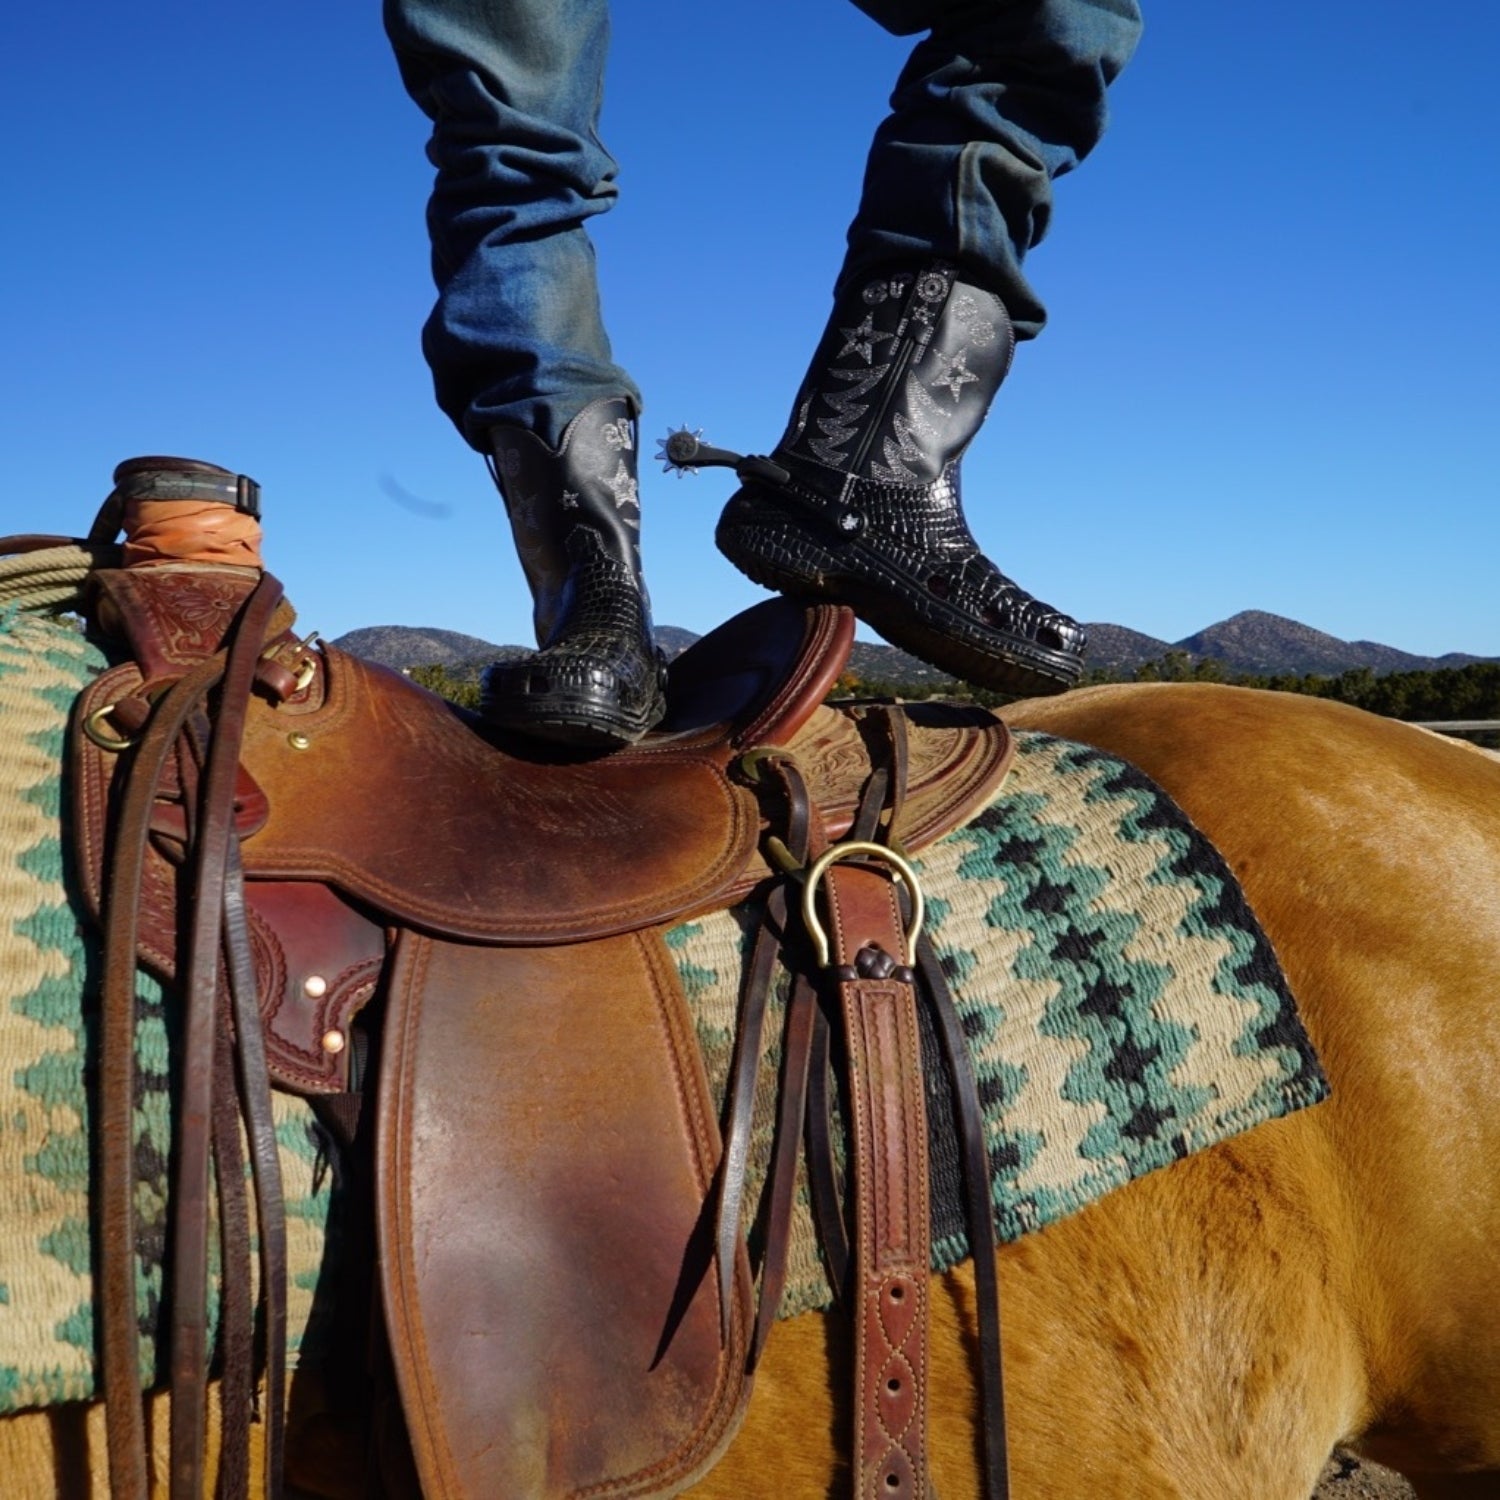 We Asked a Real Horseman to Ranch-Test the Crocs Cowboy Boots